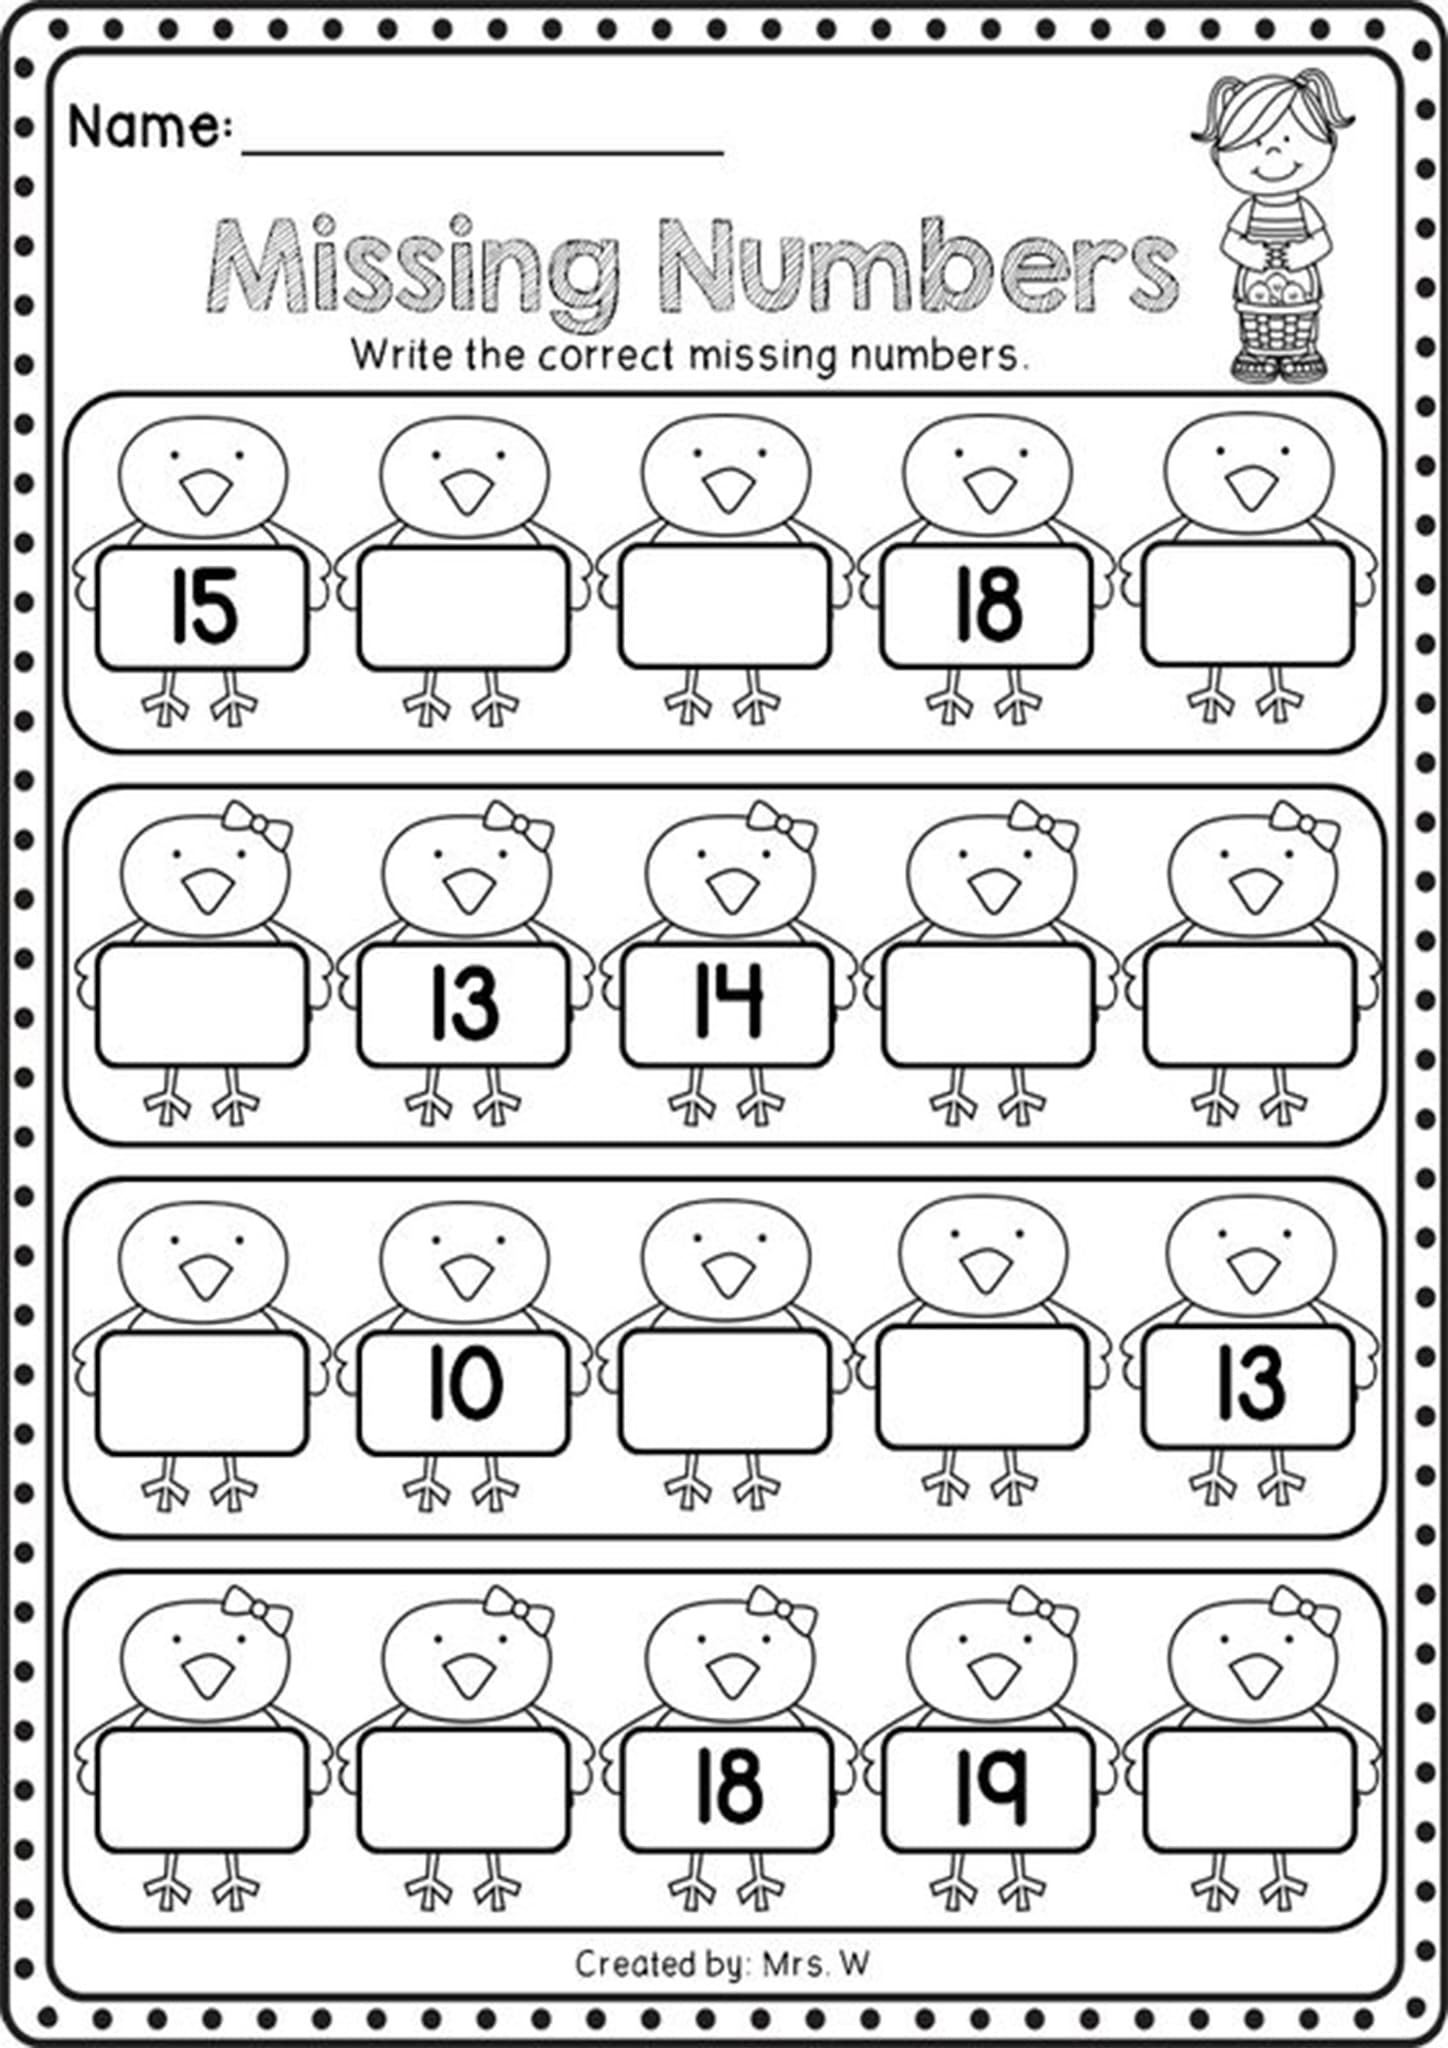 for-your-viewing-pleasure-missing-number-worksheets-first-grade-math-worksheets-preschool